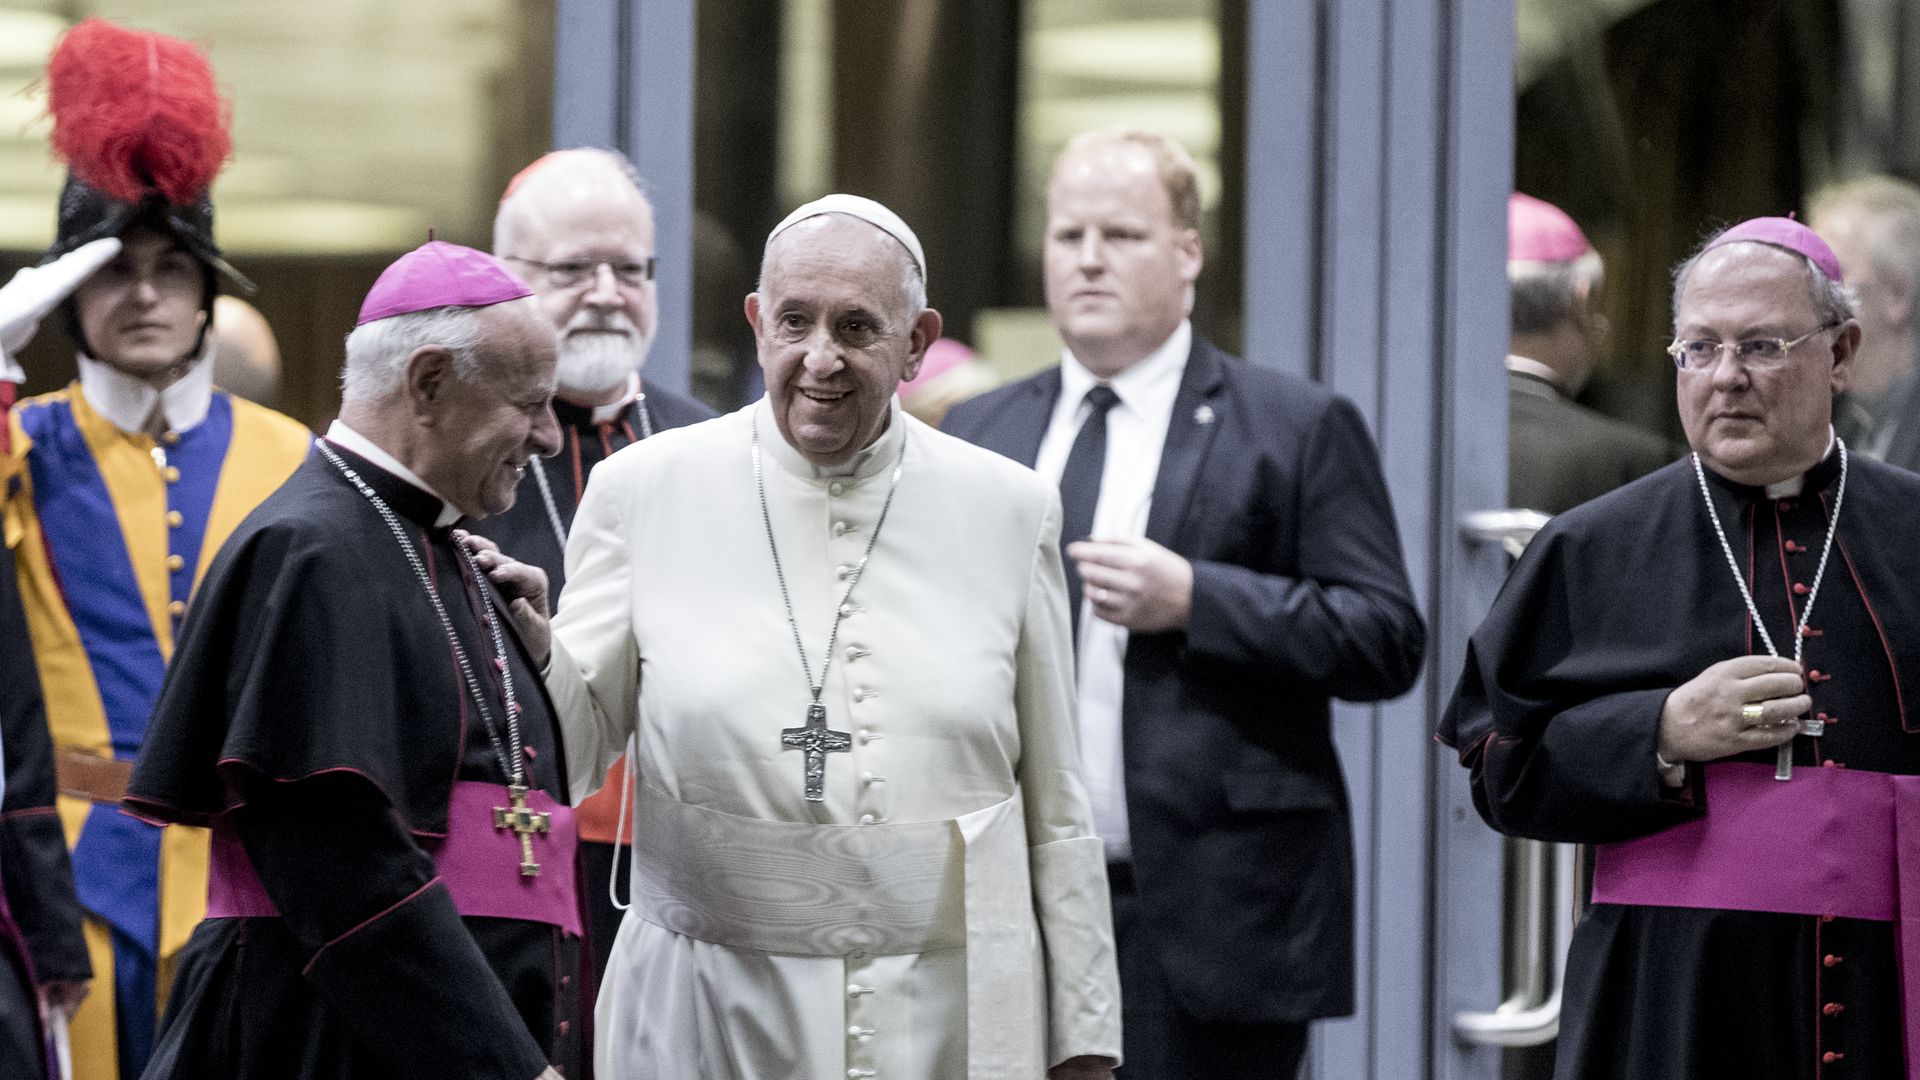 Pope Francis talks to Bishops at the end of the closing session of the Synod on the Pan amazon Region at the Synod Hall on October 26, 2019 in Vatican City, Vatican. 